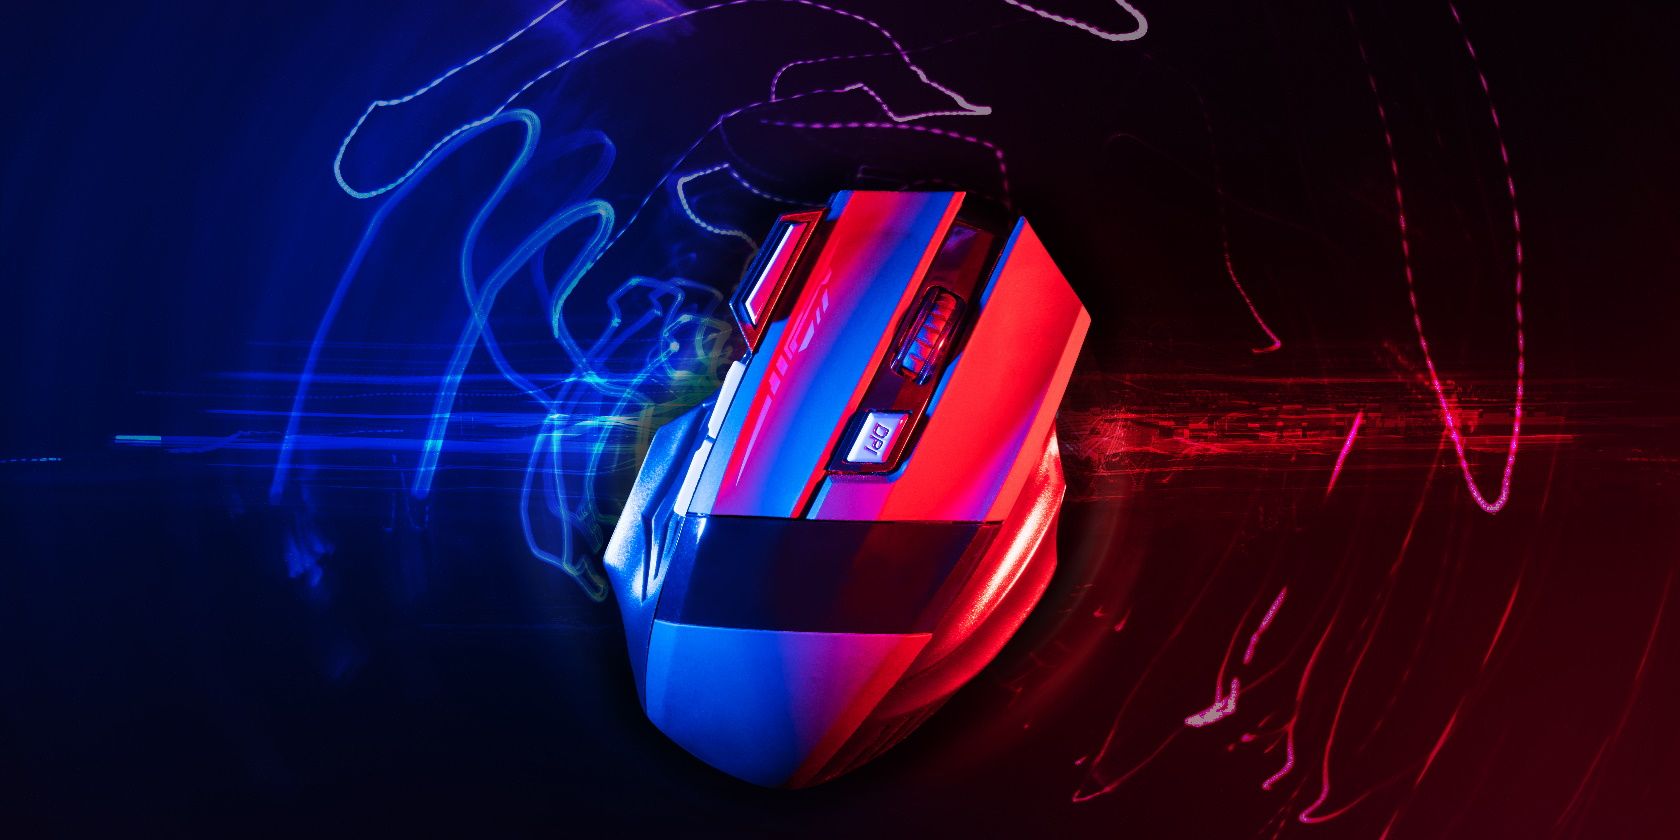 The 7 Best MMO Gaming Mice